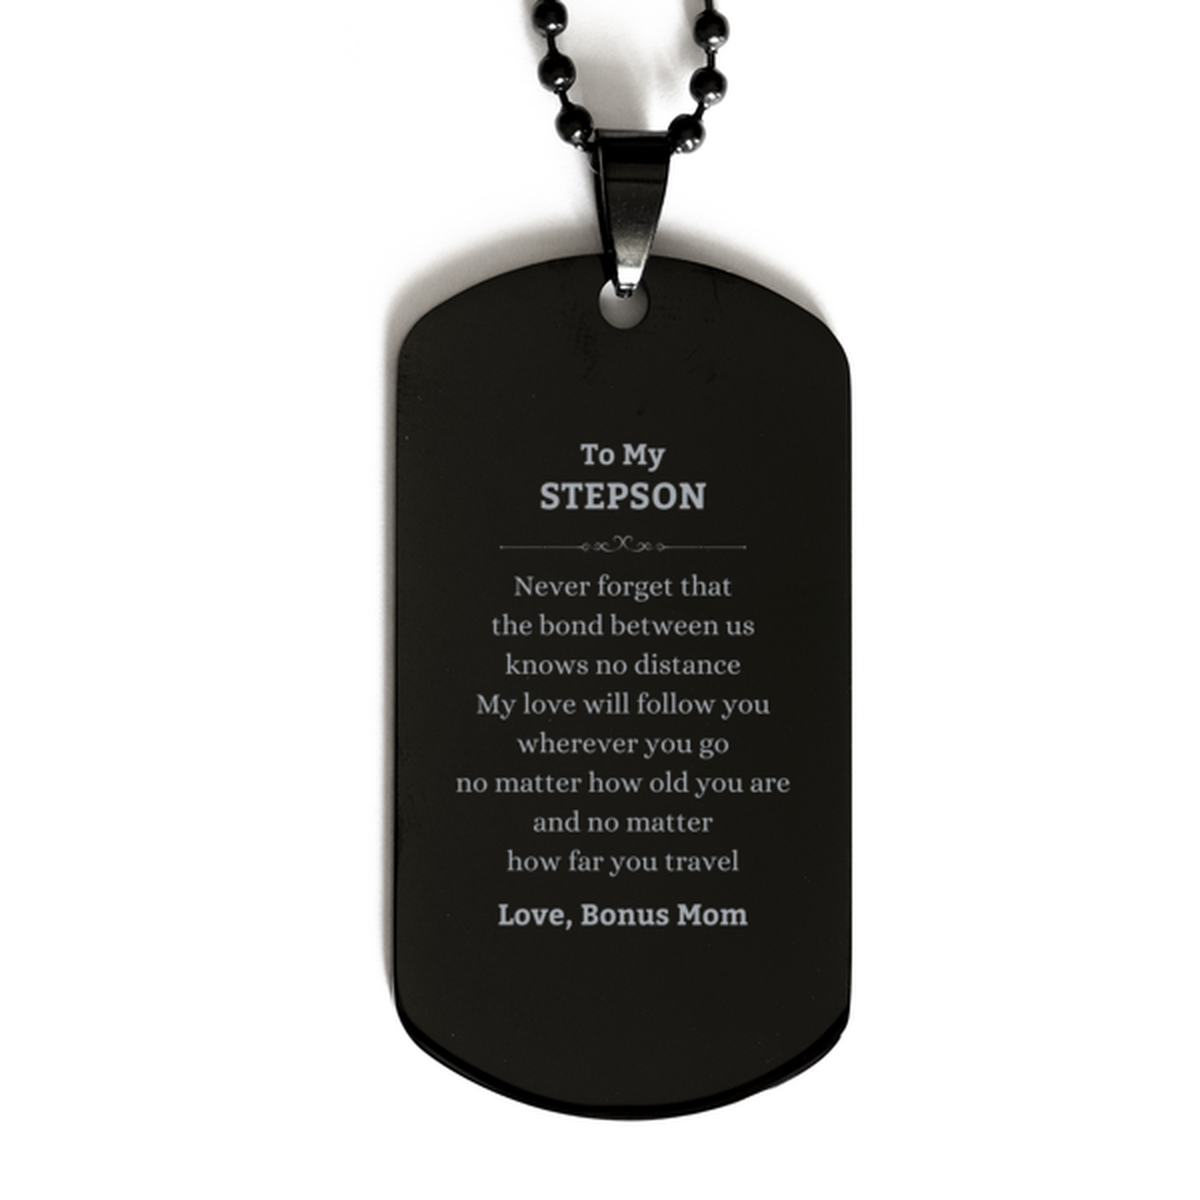 Stepson Birthday Gifts from Bonus Mom, Adjustable Black Dog Tag for Stepson Christmas Graduation Unique Gifts Stepson Never forget that the bond between us knows no distance. Love, Bonus Mom